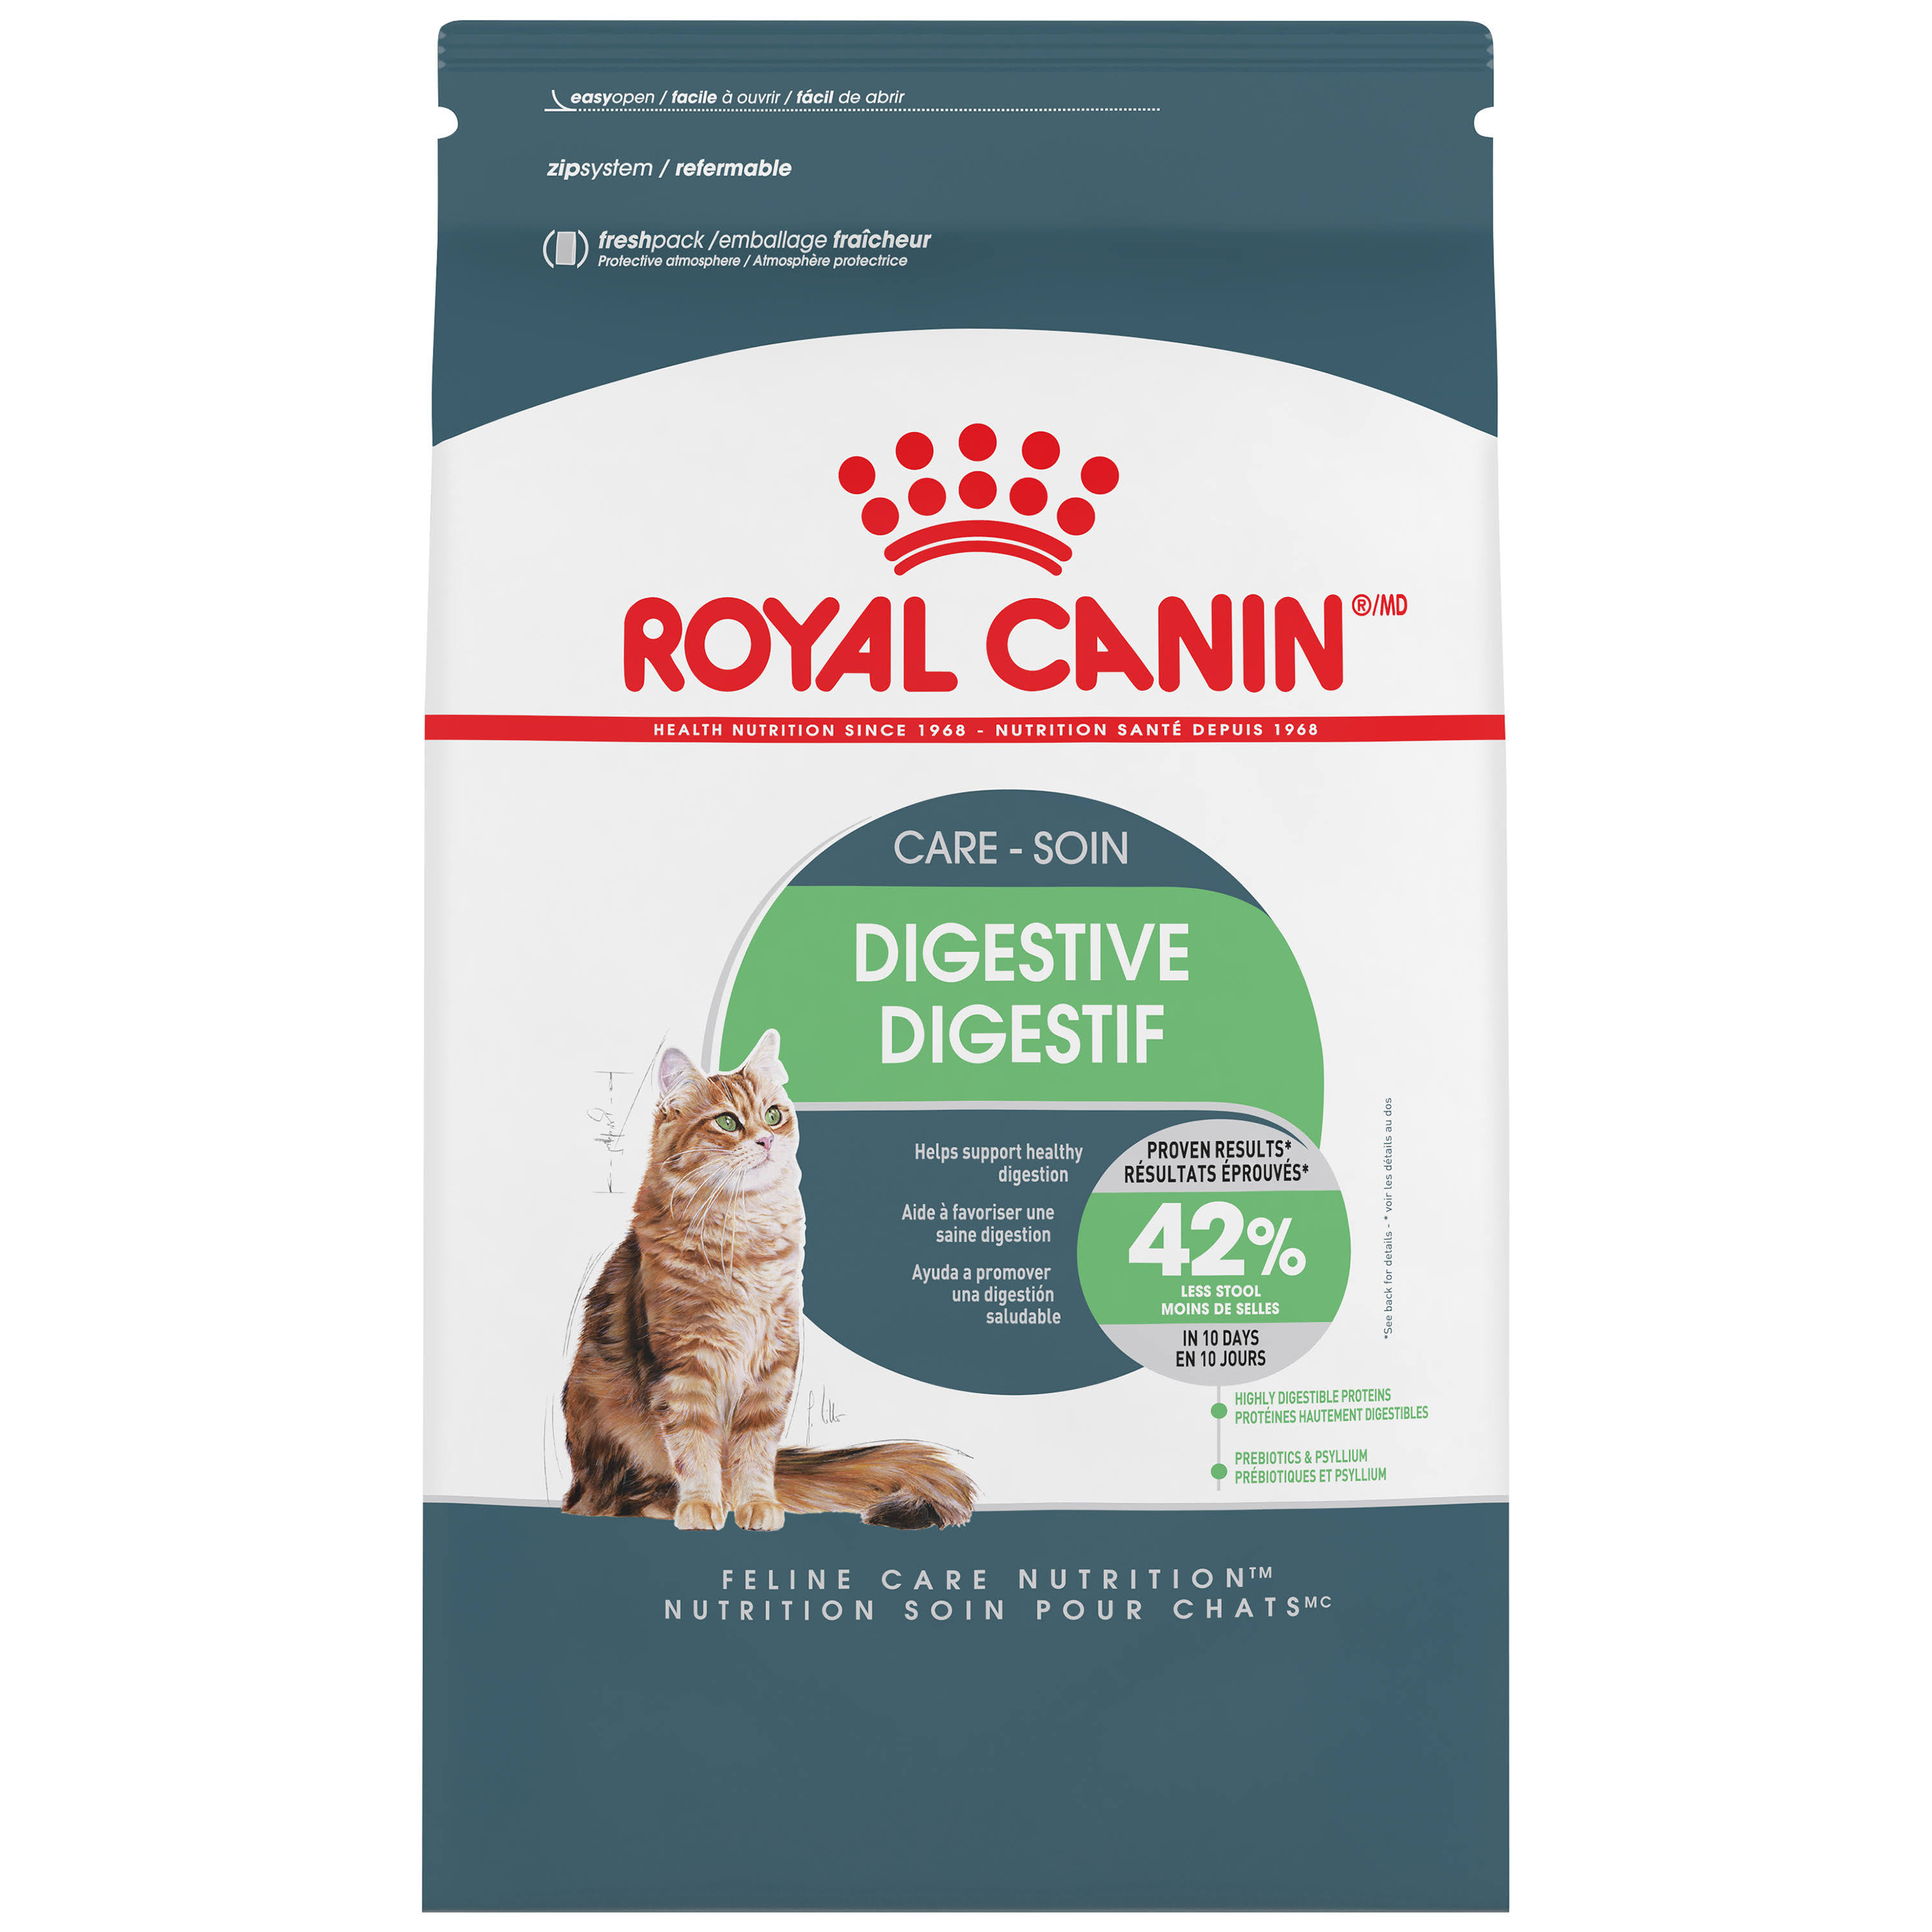 Royal Canin Adult Cat Dry Kibble Food - Digestive Care and Nutrition, 6lbs